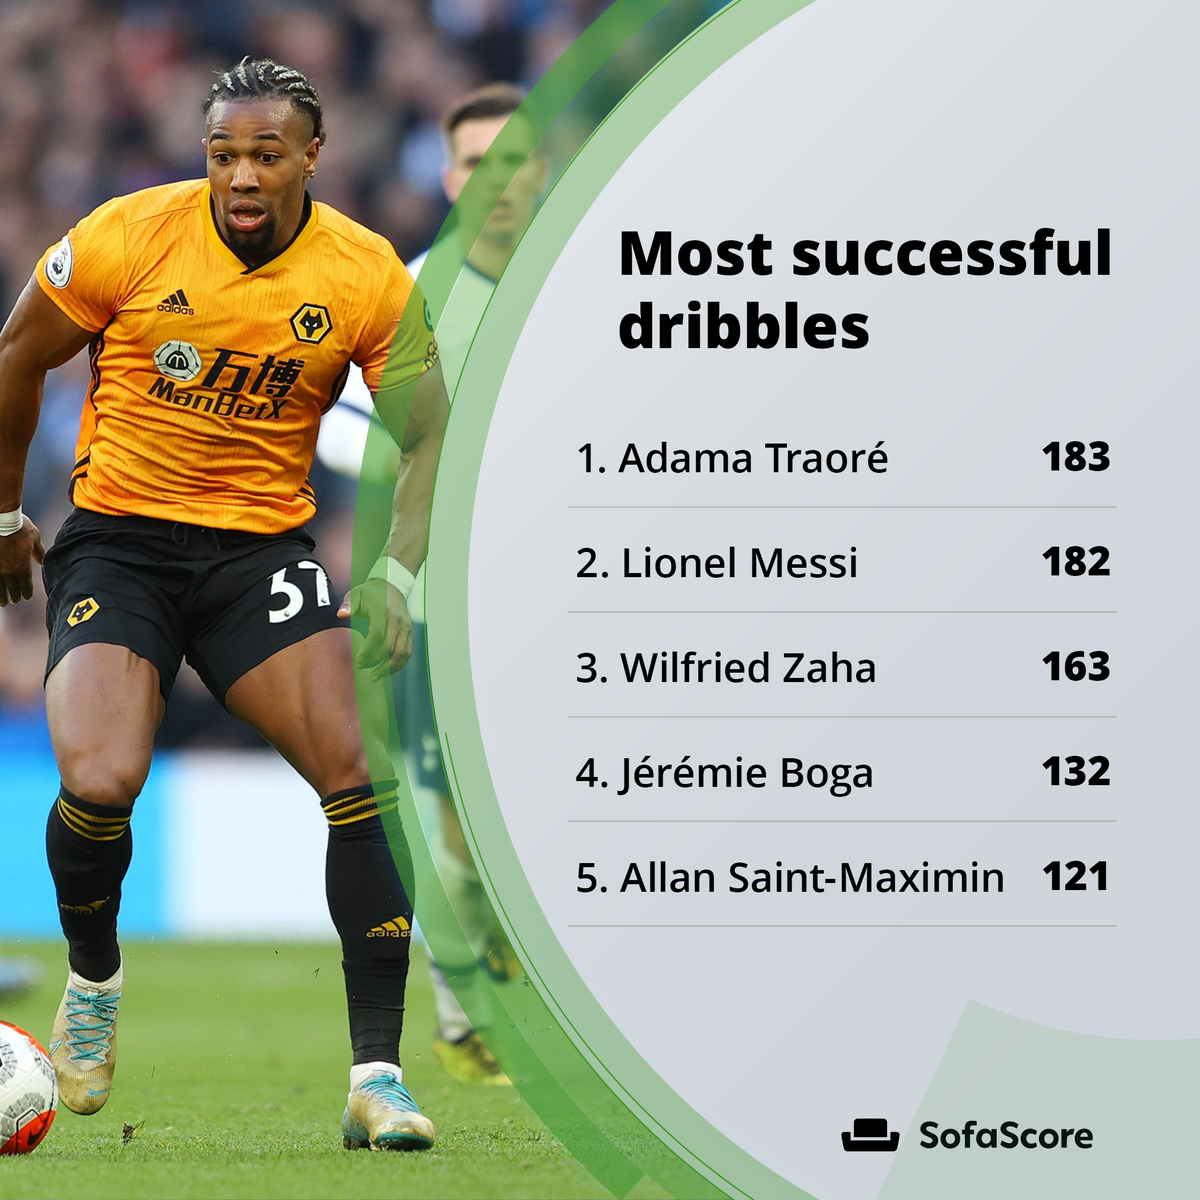 There's little surprise to see Adama Traoré at the top of the dribbling list, as he averaged over 6 successful dribbles per 90 minutes played! Traoré also has the best dribble percentage of these 5, completing a whopping 75% of dribbles he attempted. 